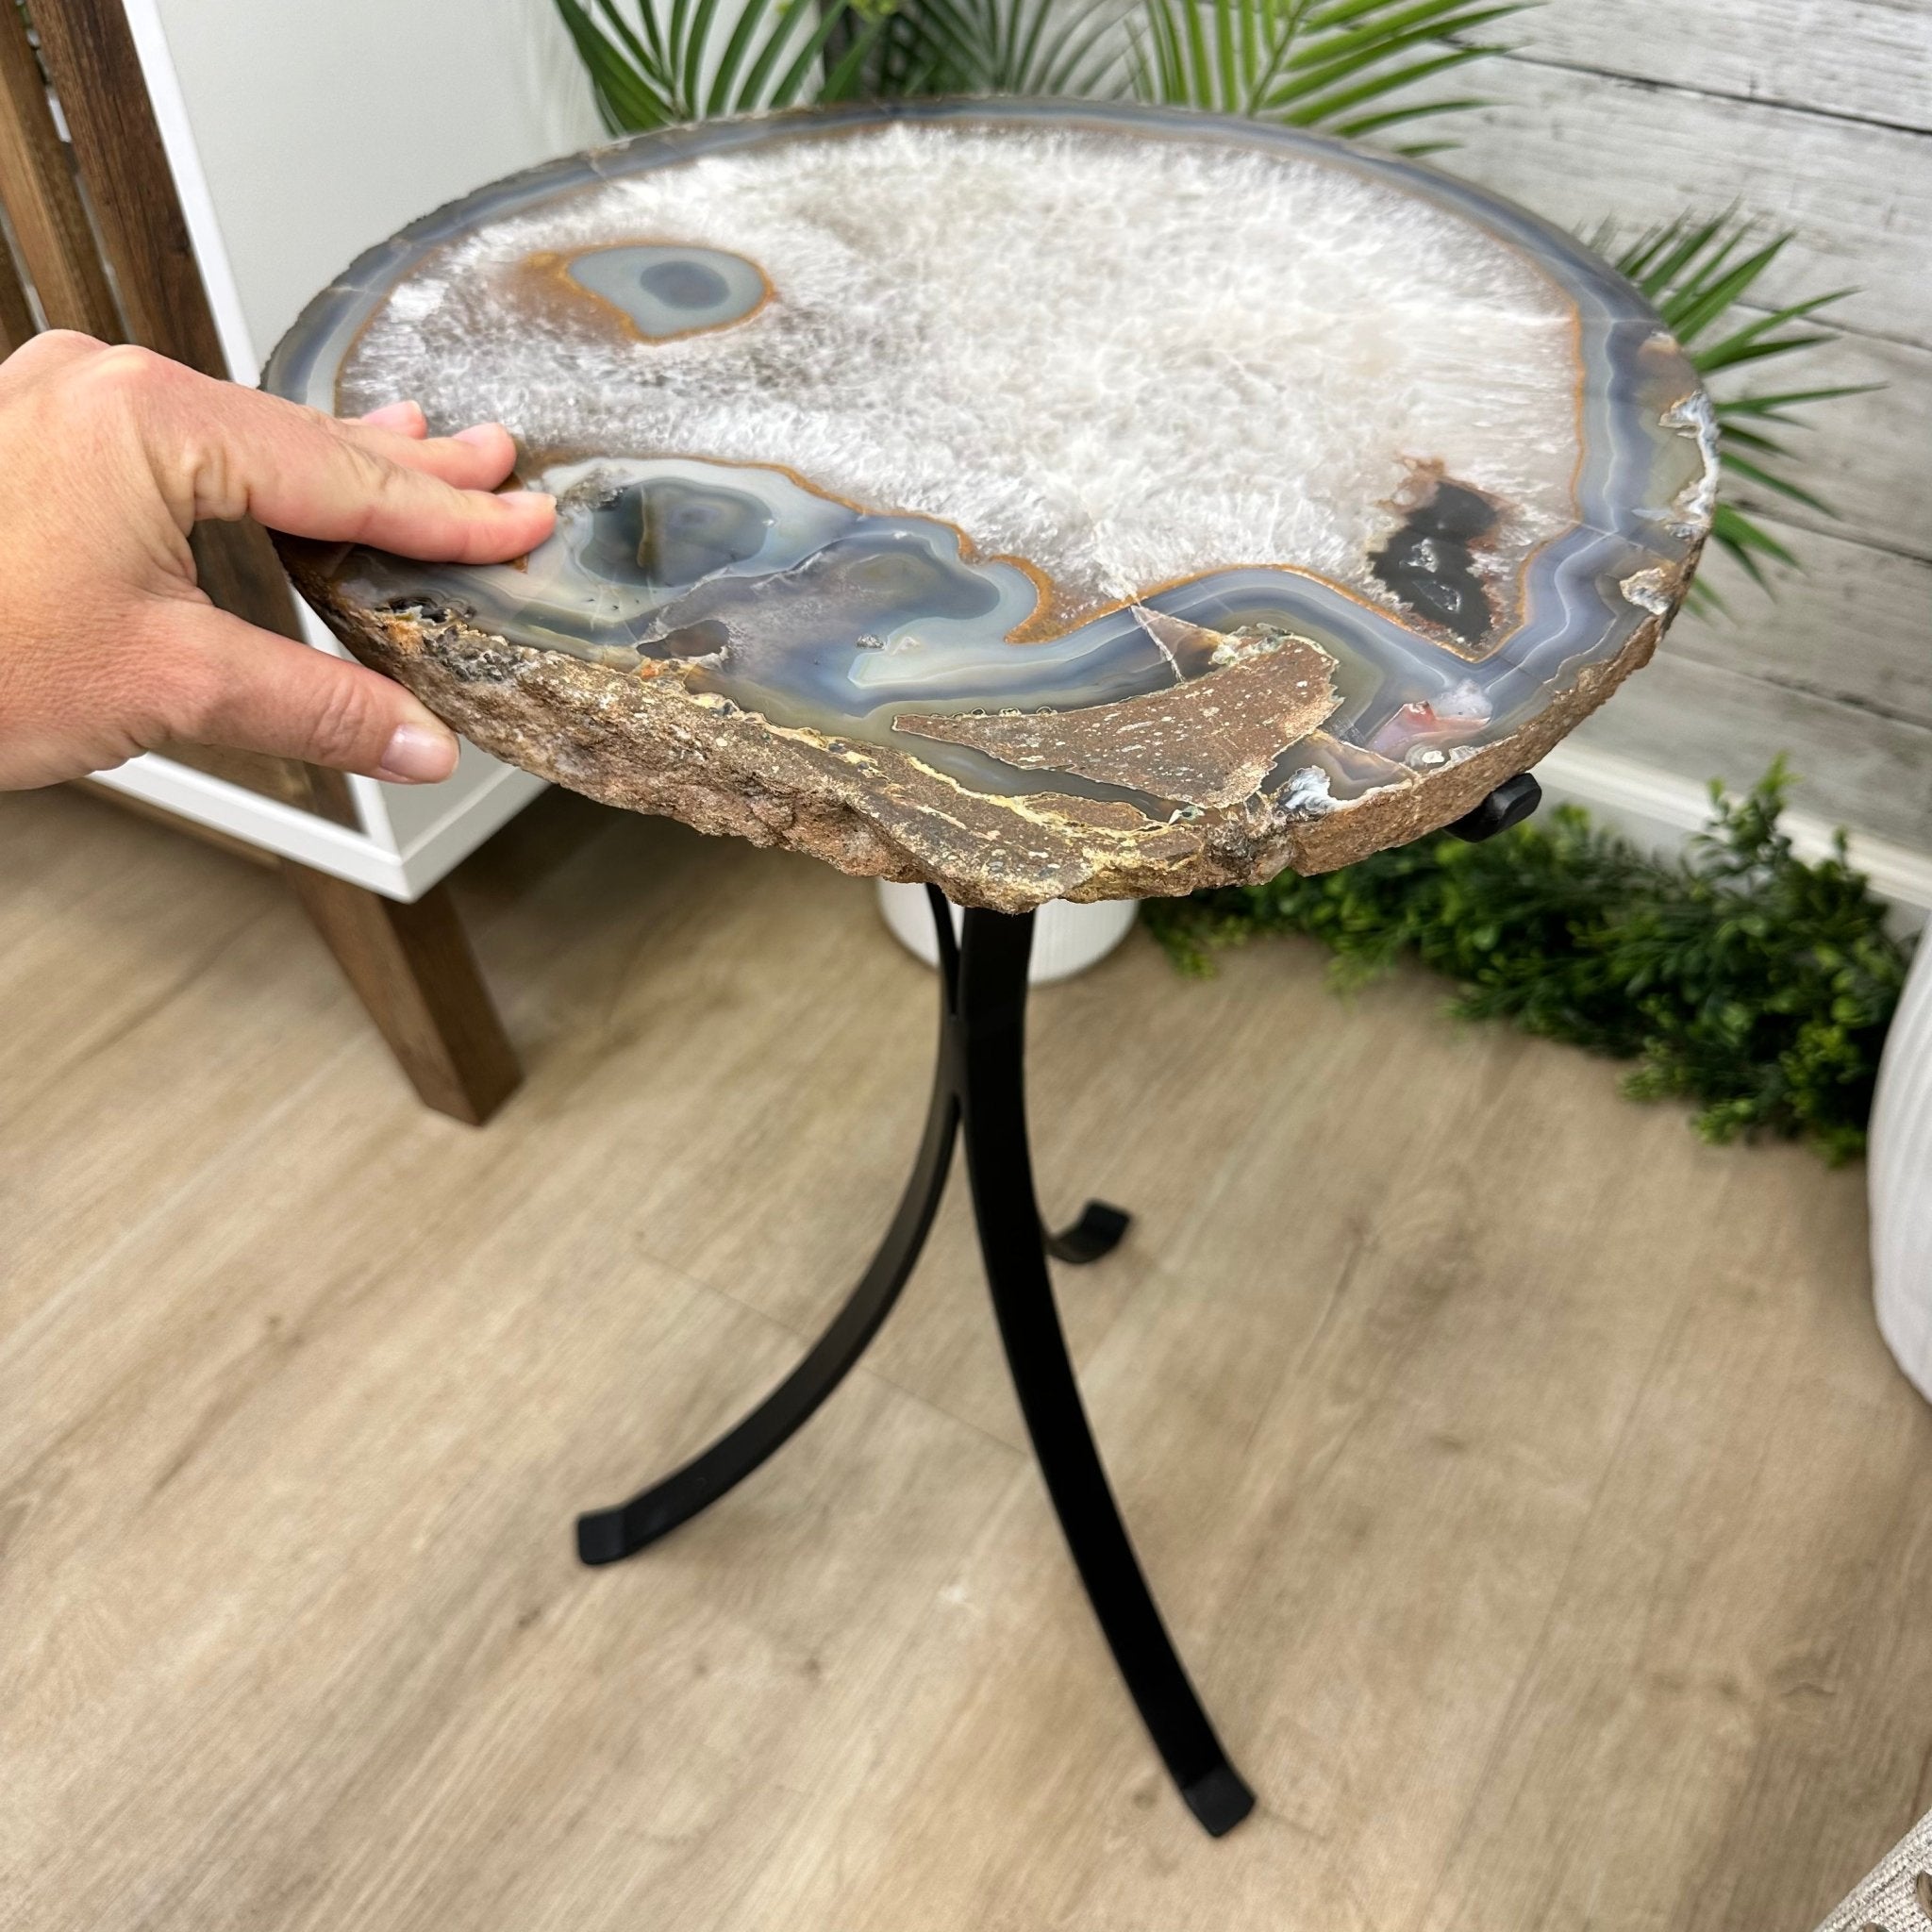 Natural Brazilian Agate Side Table on a black metal base, 22" tall #1306-0040 by Brazil Gems - Brazil GemsBrazil GemsNatural Brazilian Agate Side Table on a black metal base, 22" tall #1306-0040 by Brazil GemsTables: Side1306-0040